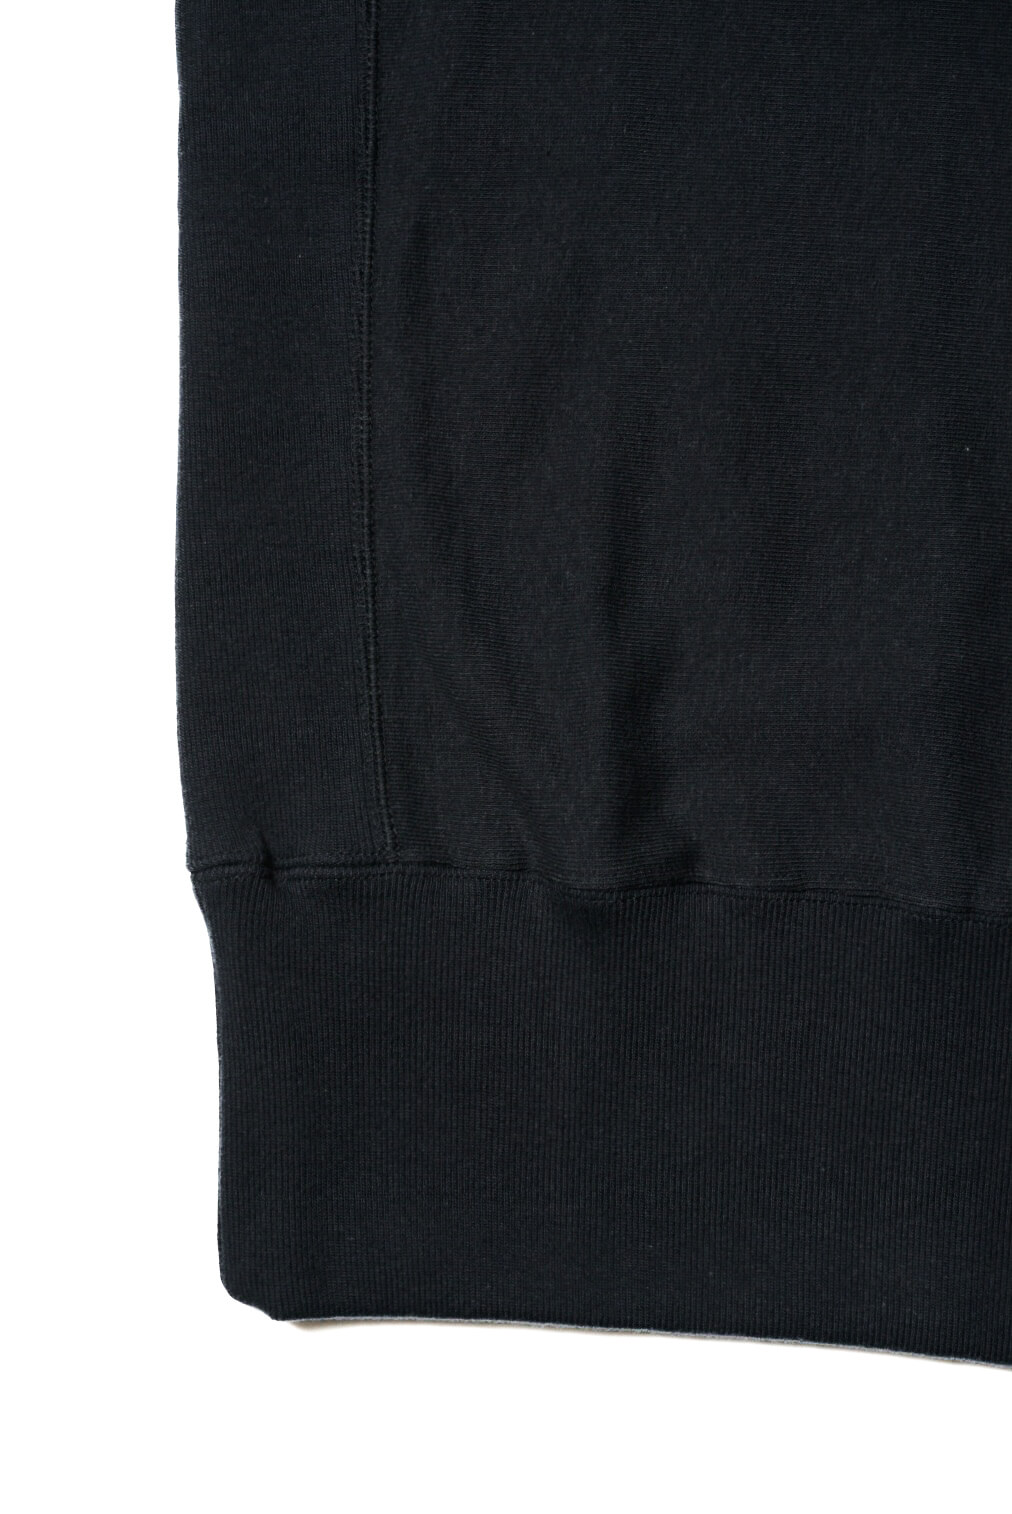 S/S SWEAT SHIRT - ARCH EXCLUSIVE（NAVY）